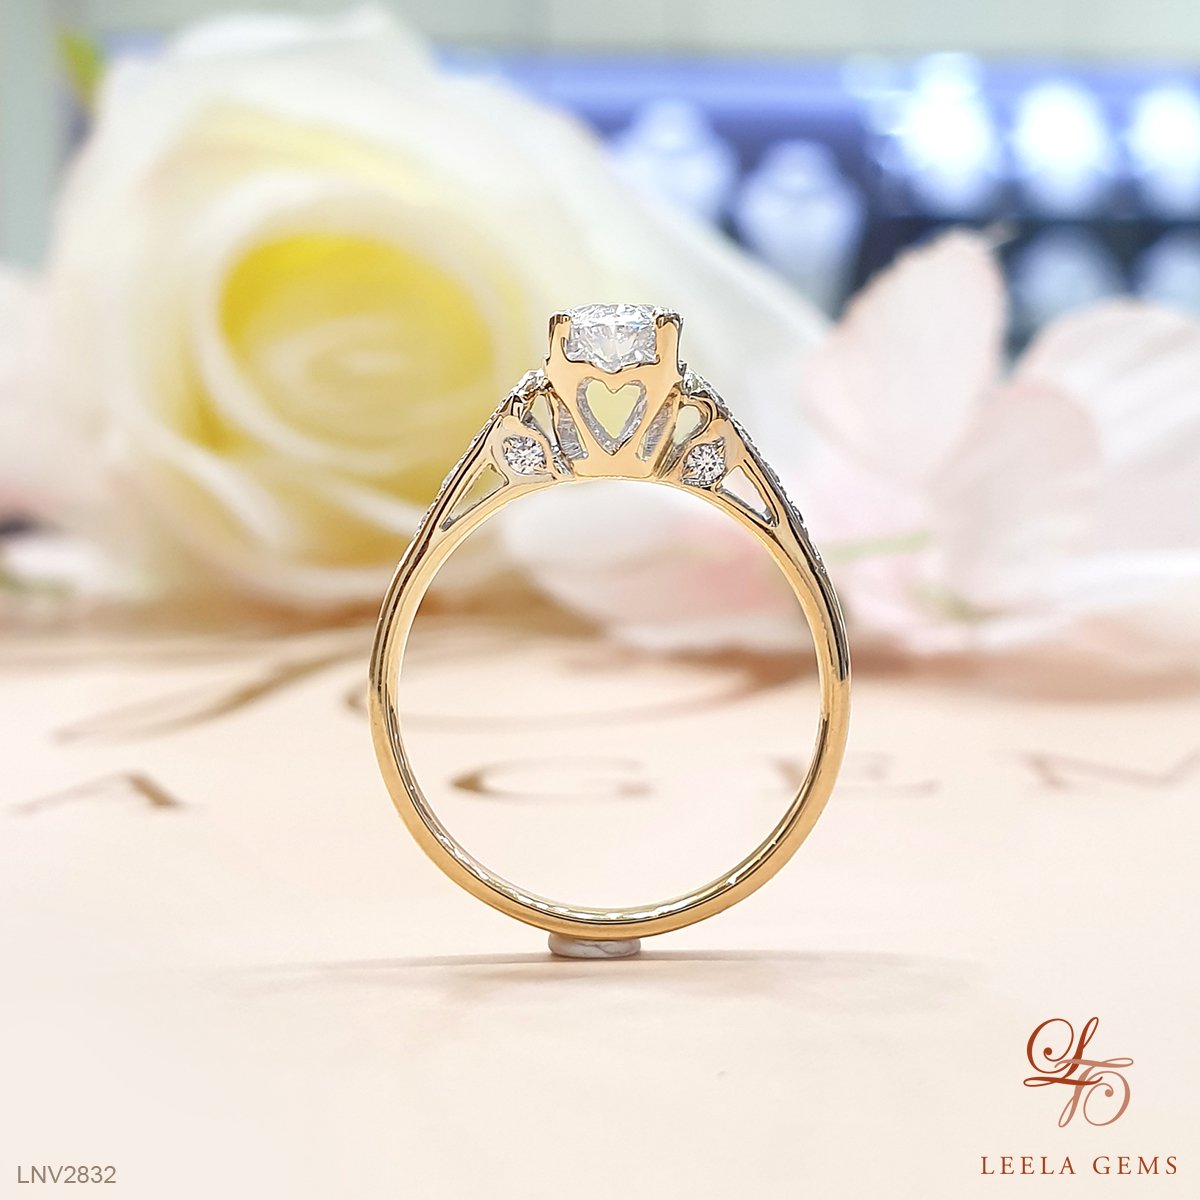 Old European Cut Engagement Ring, Solitaire with Antique Diamond set in  Yellow Gold Filigree Pierced Setting. - Addy's Vintage